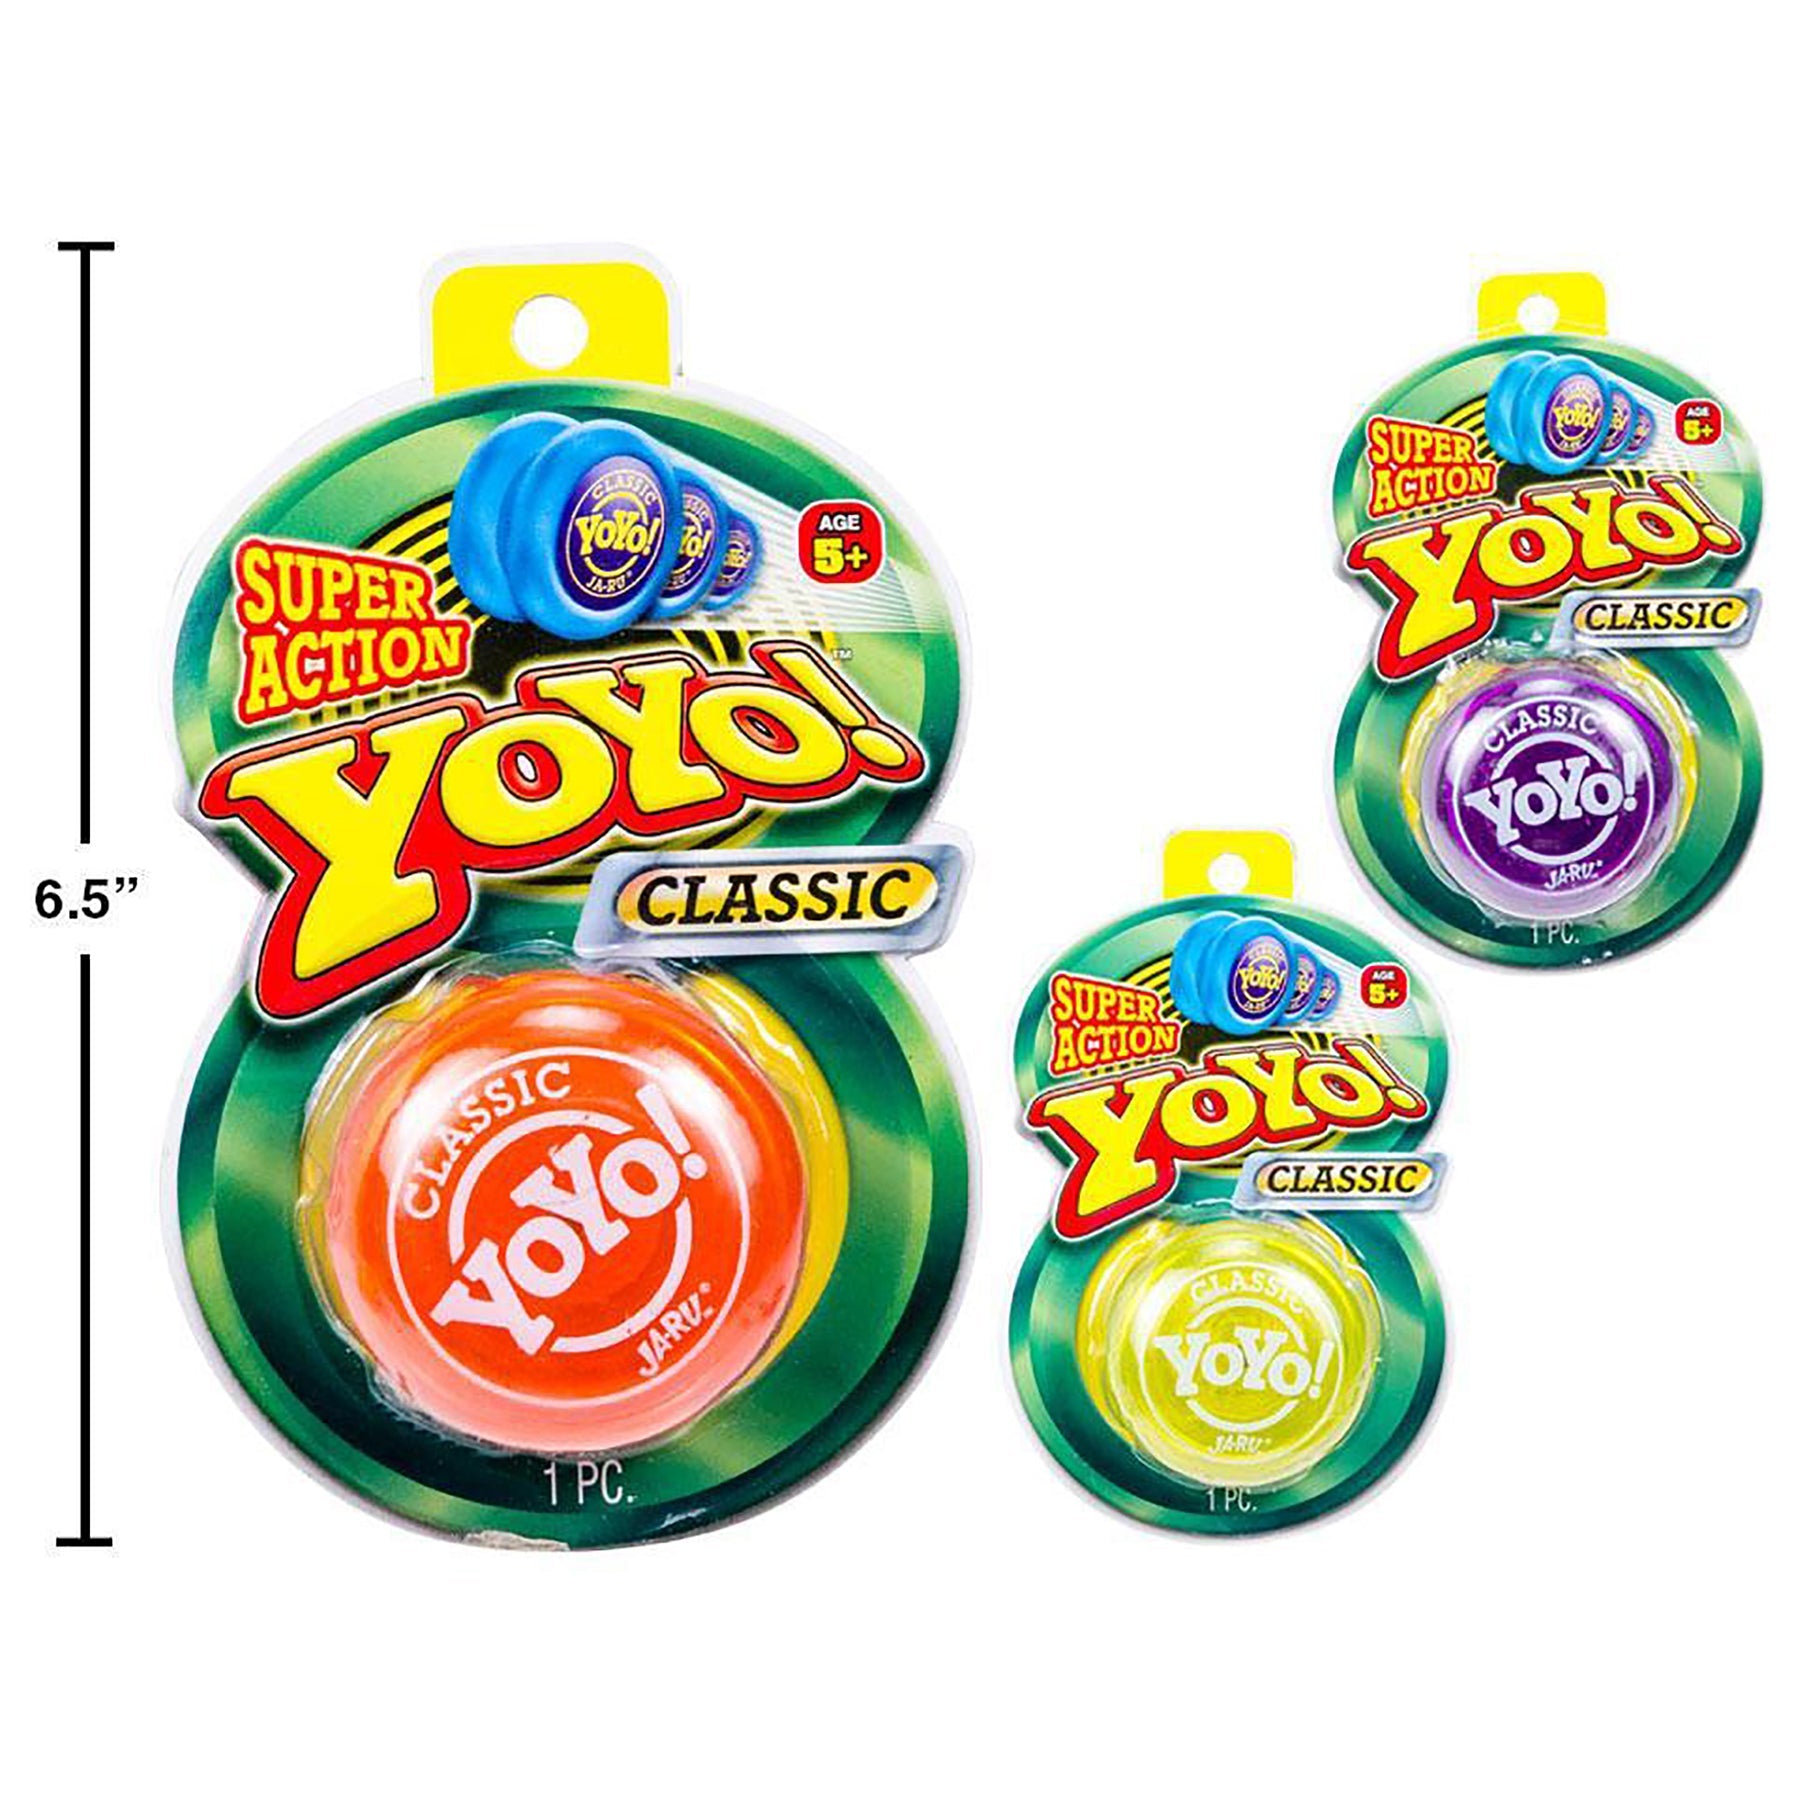 Super Action Classic "YoYo" 2.25in